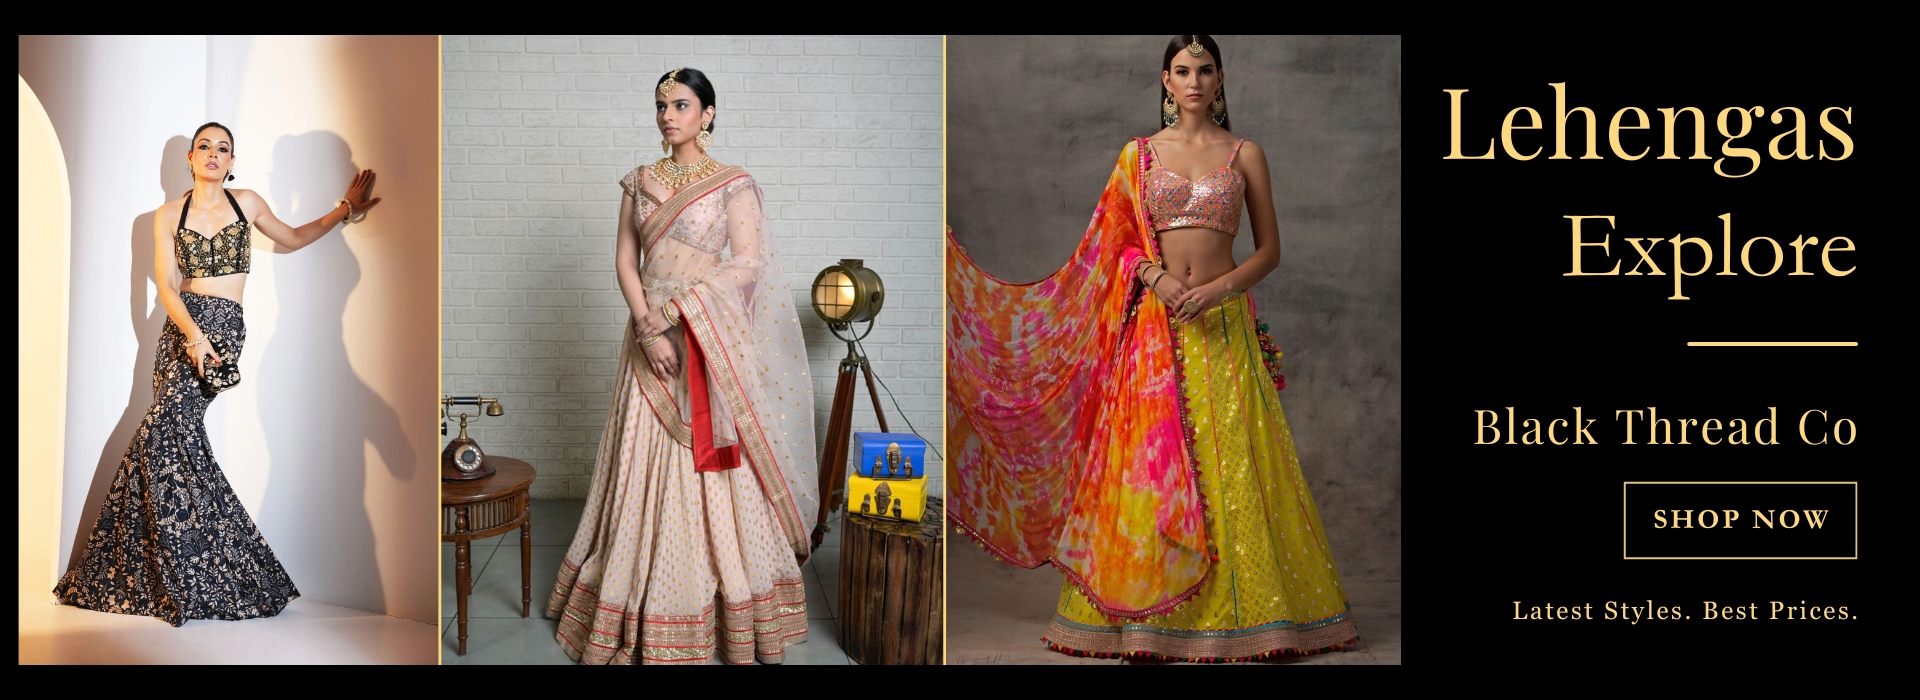 Lehengas by Top Indian Brands - Black Thread Co UK